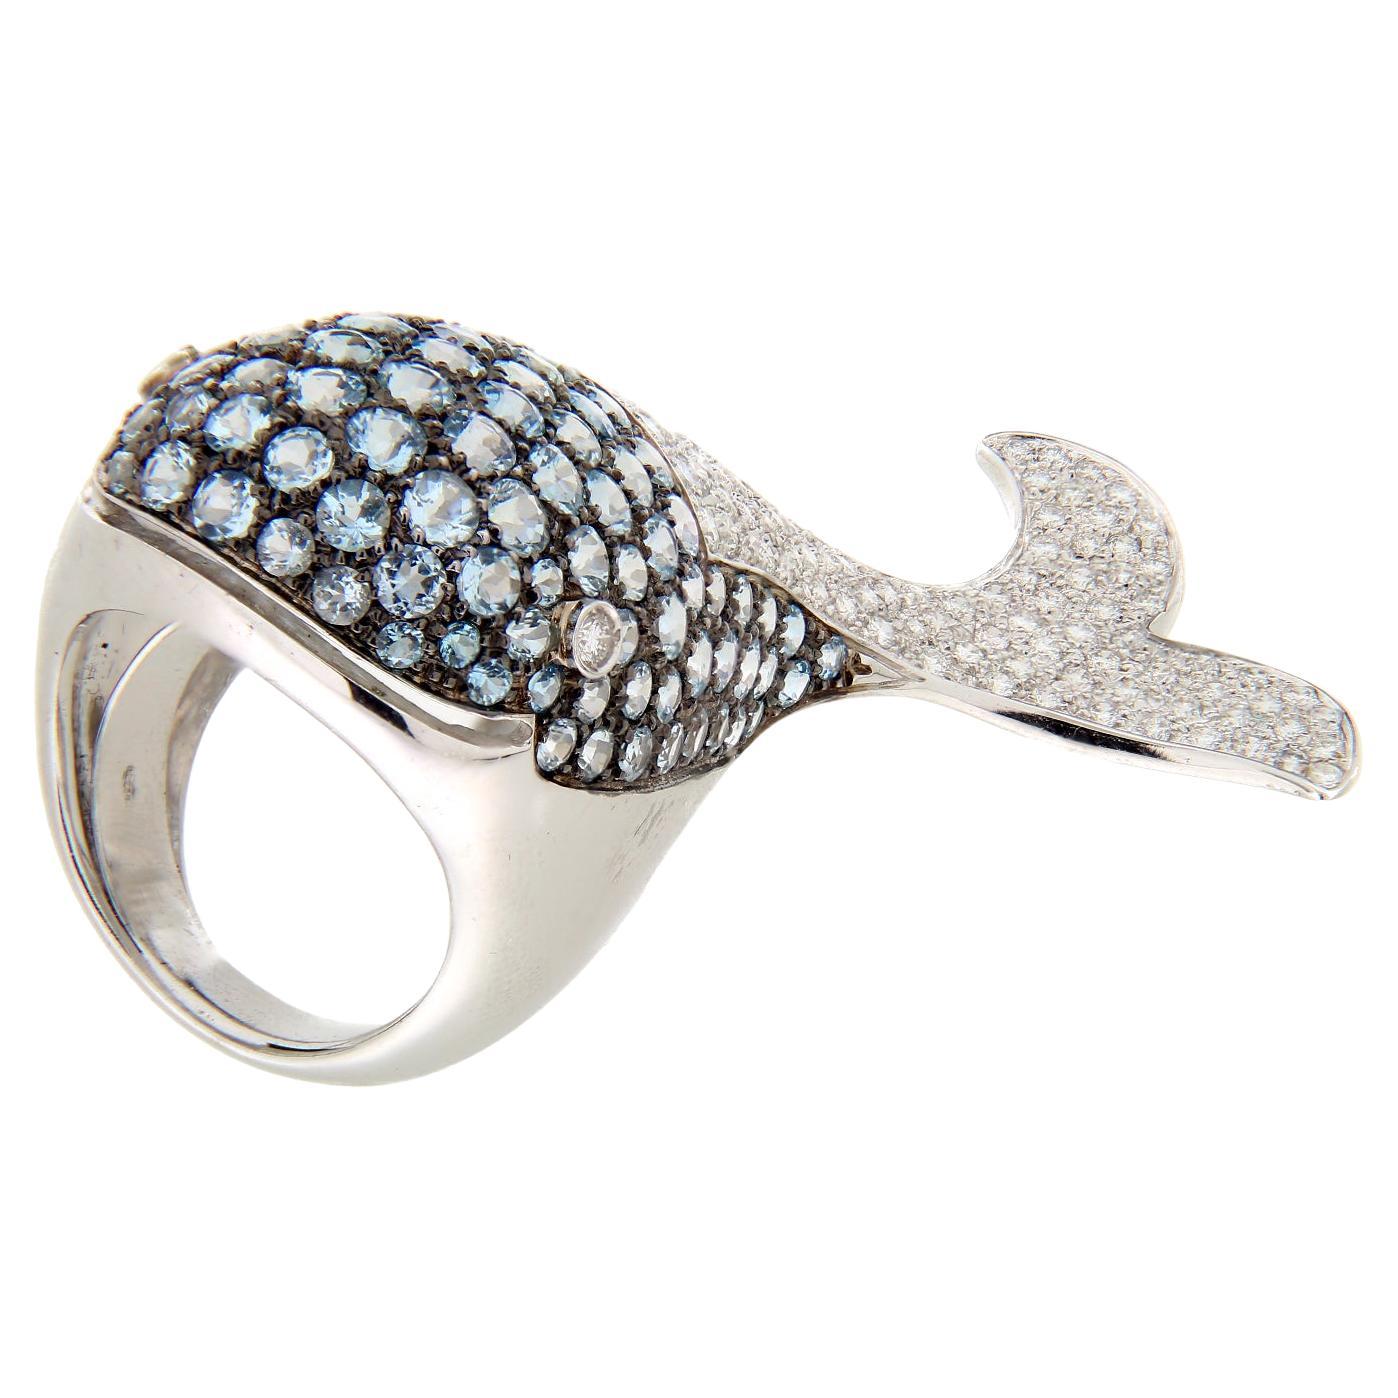 18Kt White Gold "Whale" Ring Diamonds 1.71 Ct Aquamarine 7.10 Ct For Sale